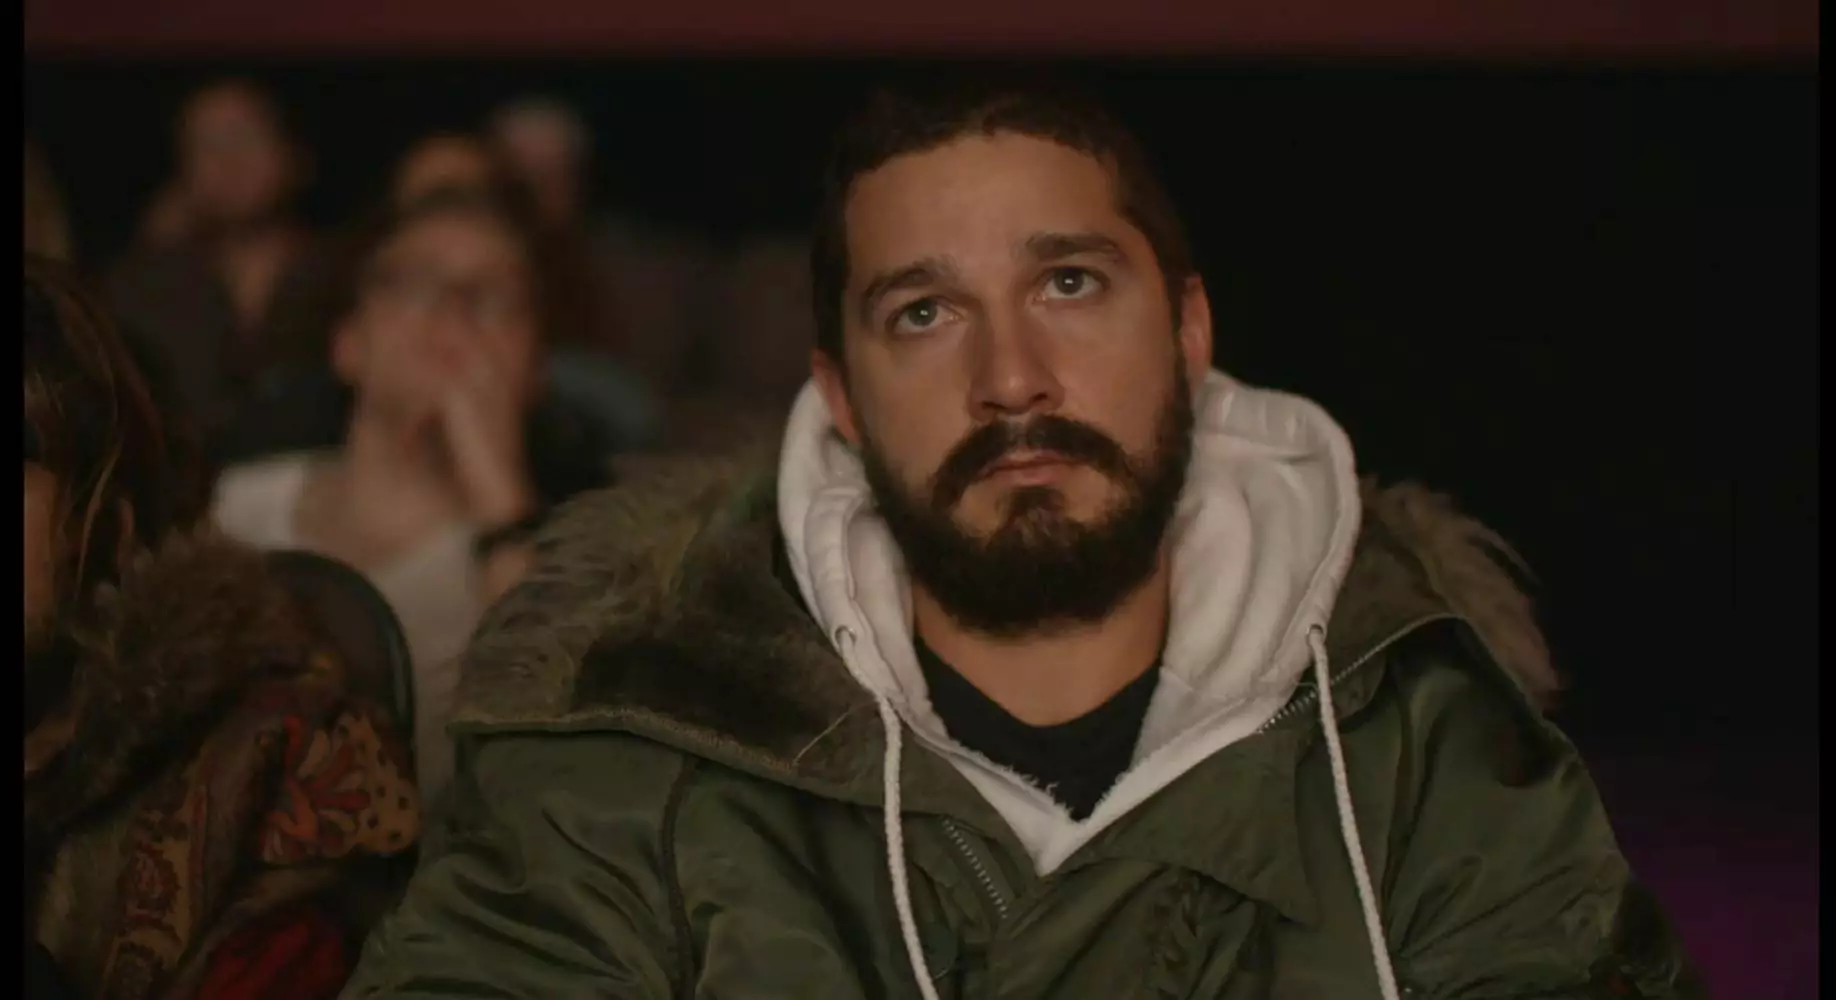 Man Punched In Face By Stranger Because He Looks Like Shia LaBeouf